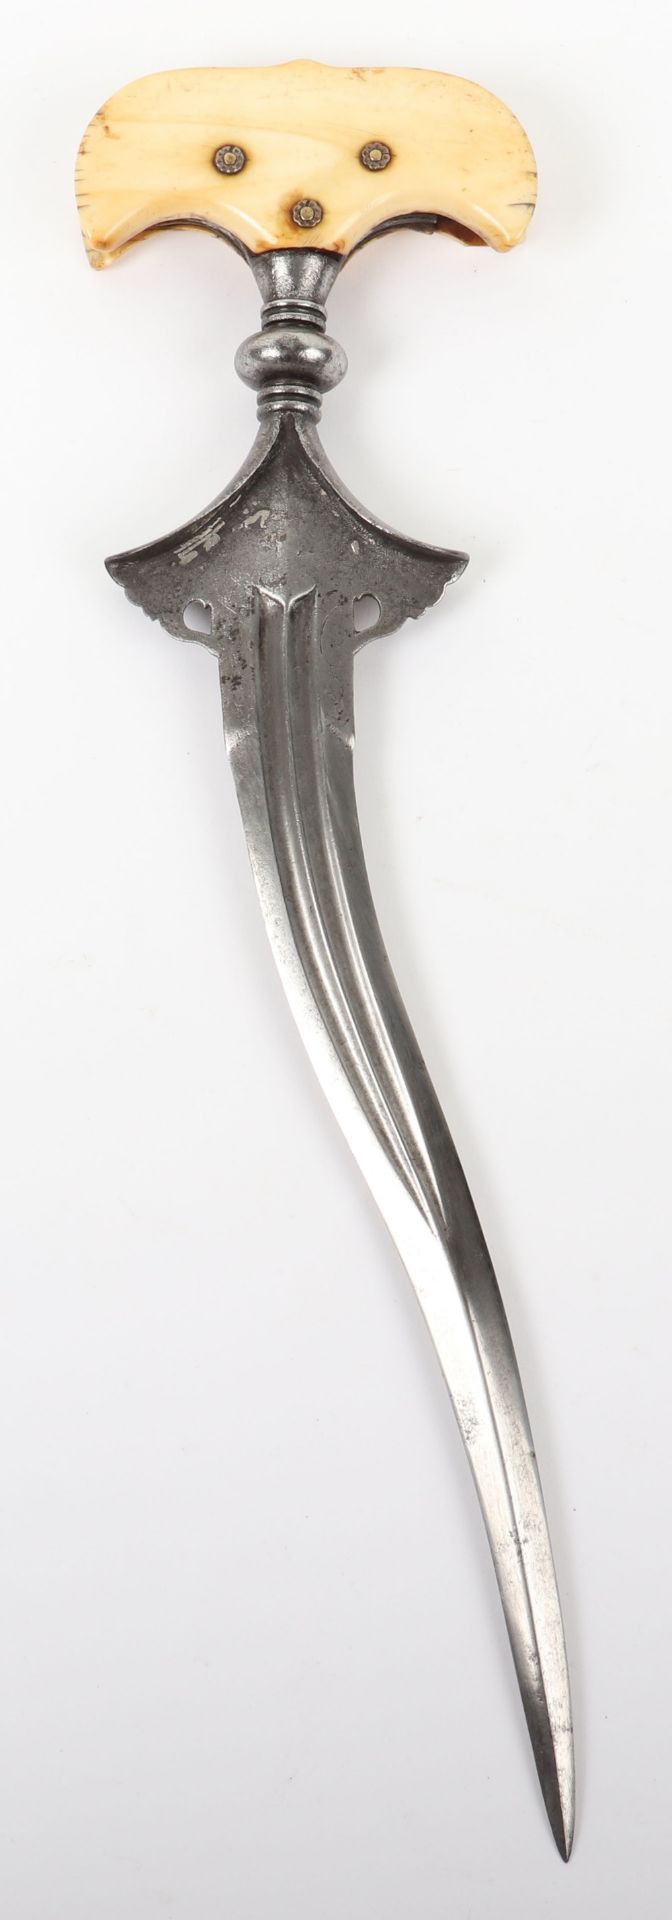 ^ Indian Dagger Khanjarli from Vizianagram, 17th or 18th Century - Image 14 of 14